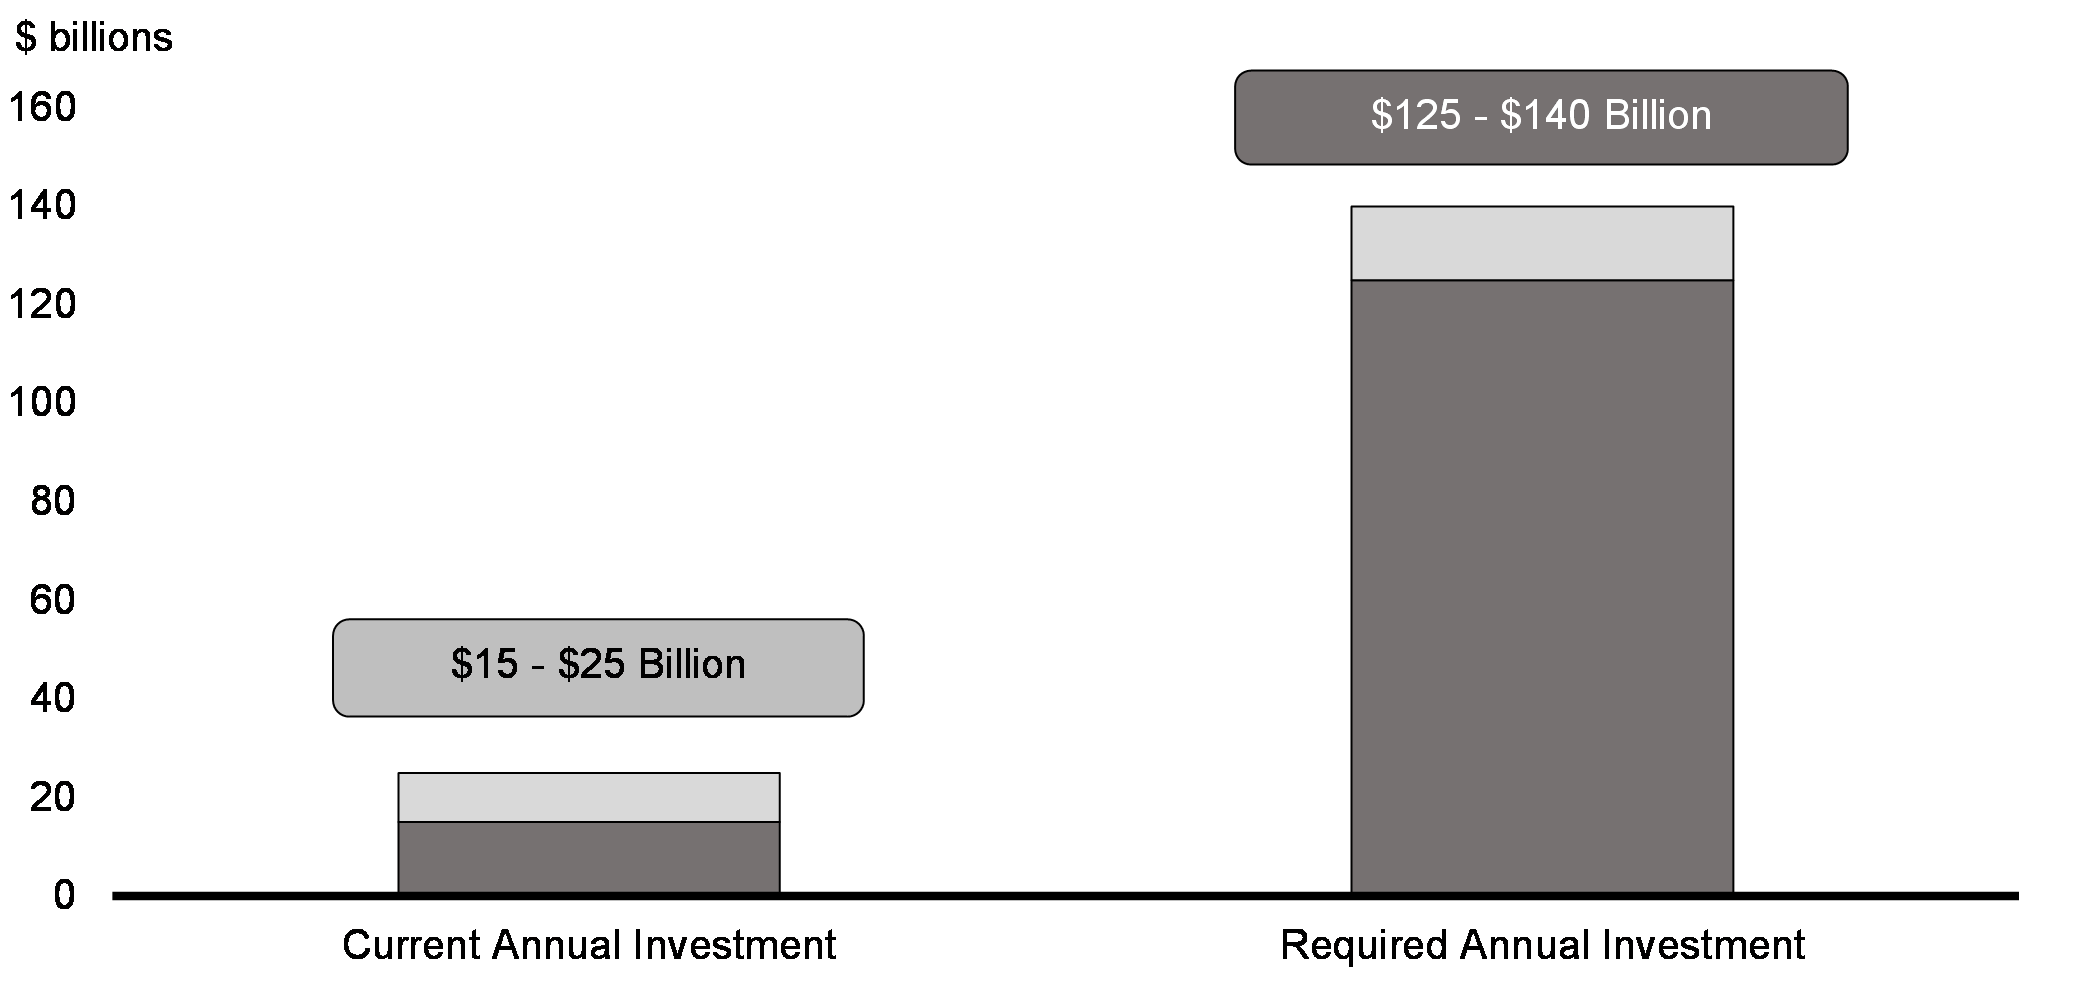 Chart 3.1: Annual Investment to Attain Net-Zero Emissions in Canada by 2050  